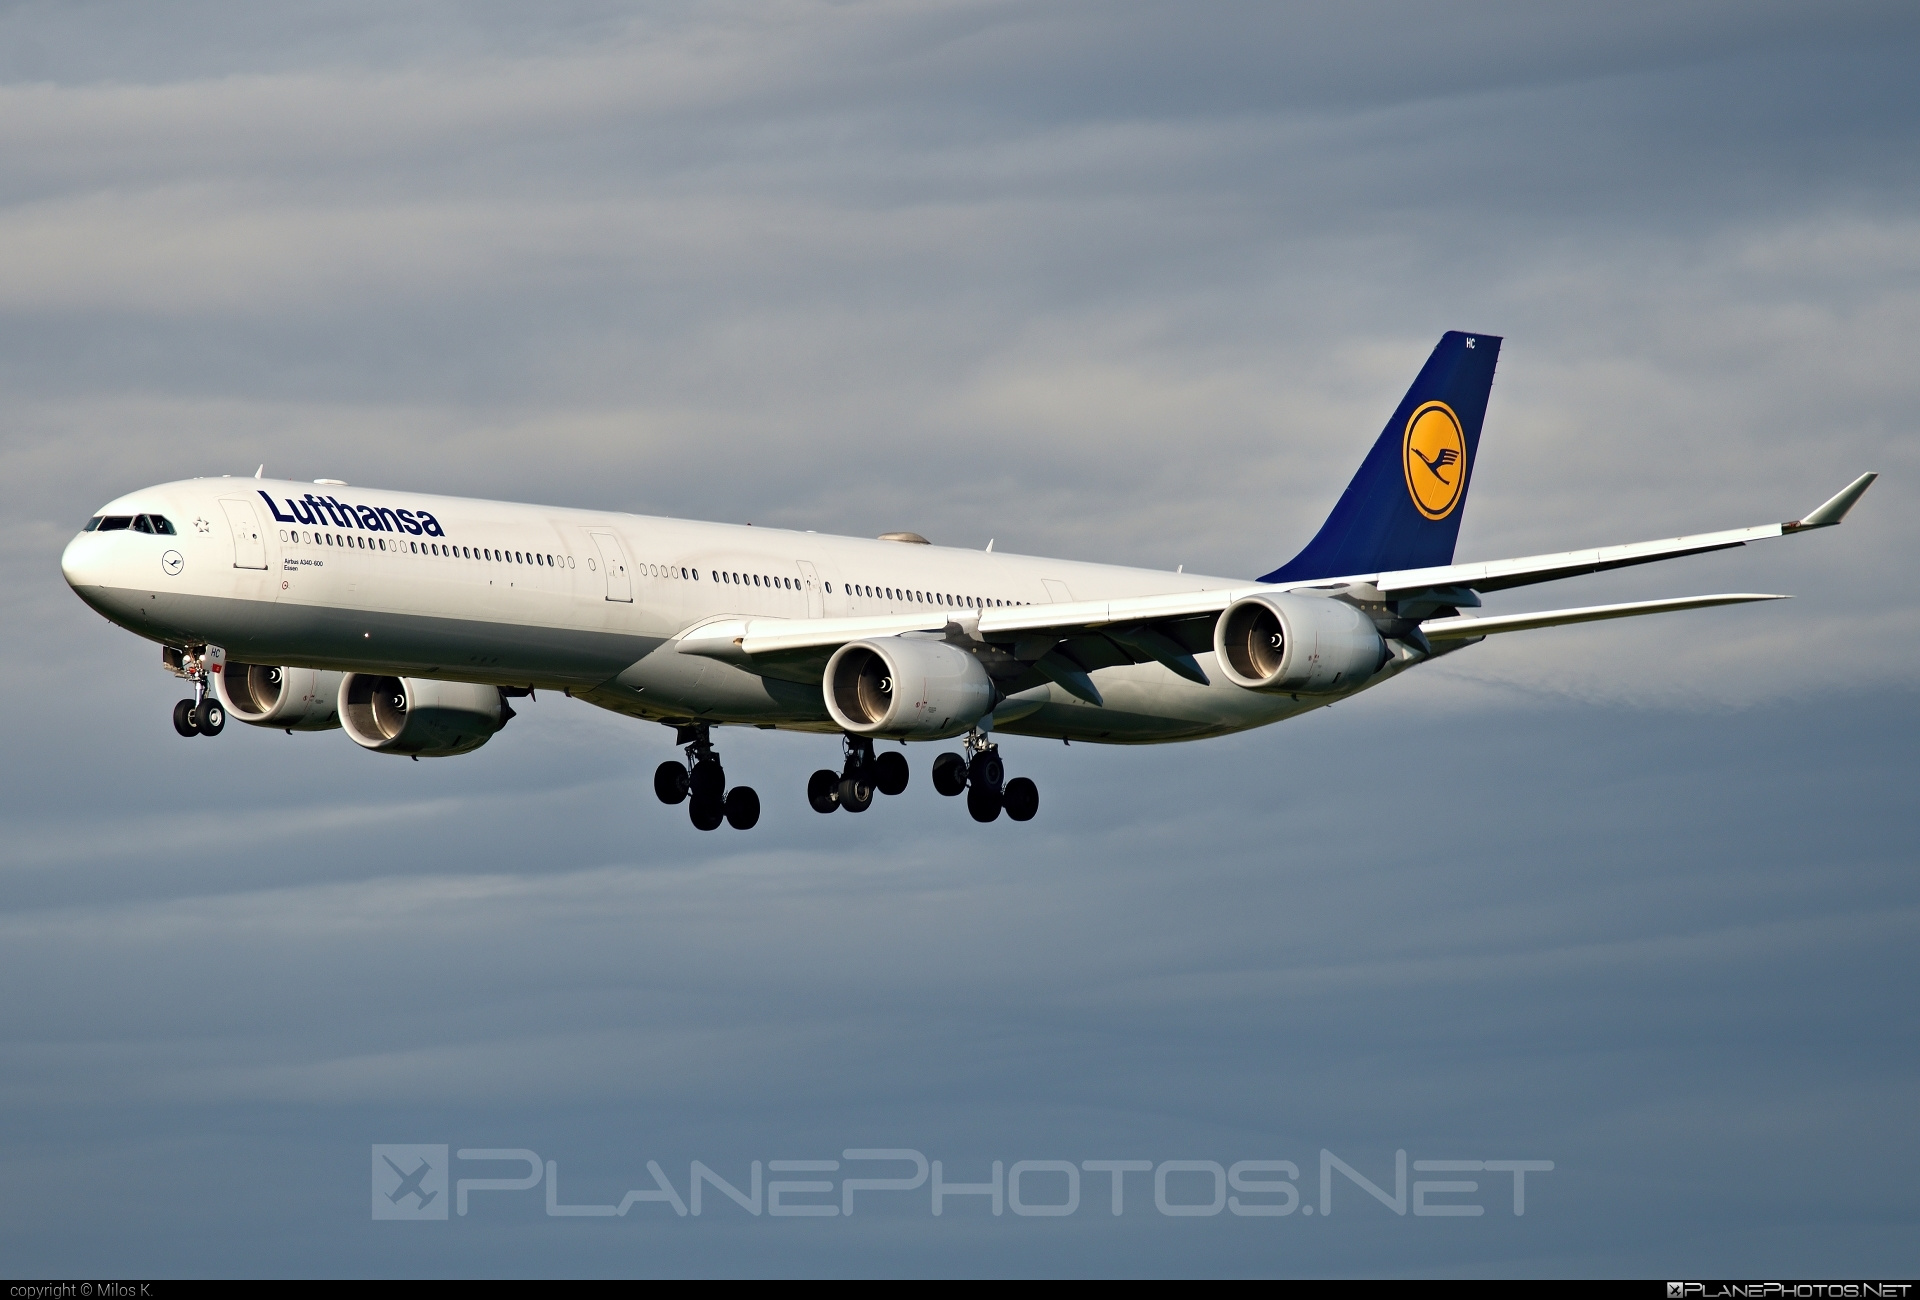 Airbus A340-642 - D-AIHC operated by Lufthansa #a340 #a340family #airbus #airbus340 #lufthansa